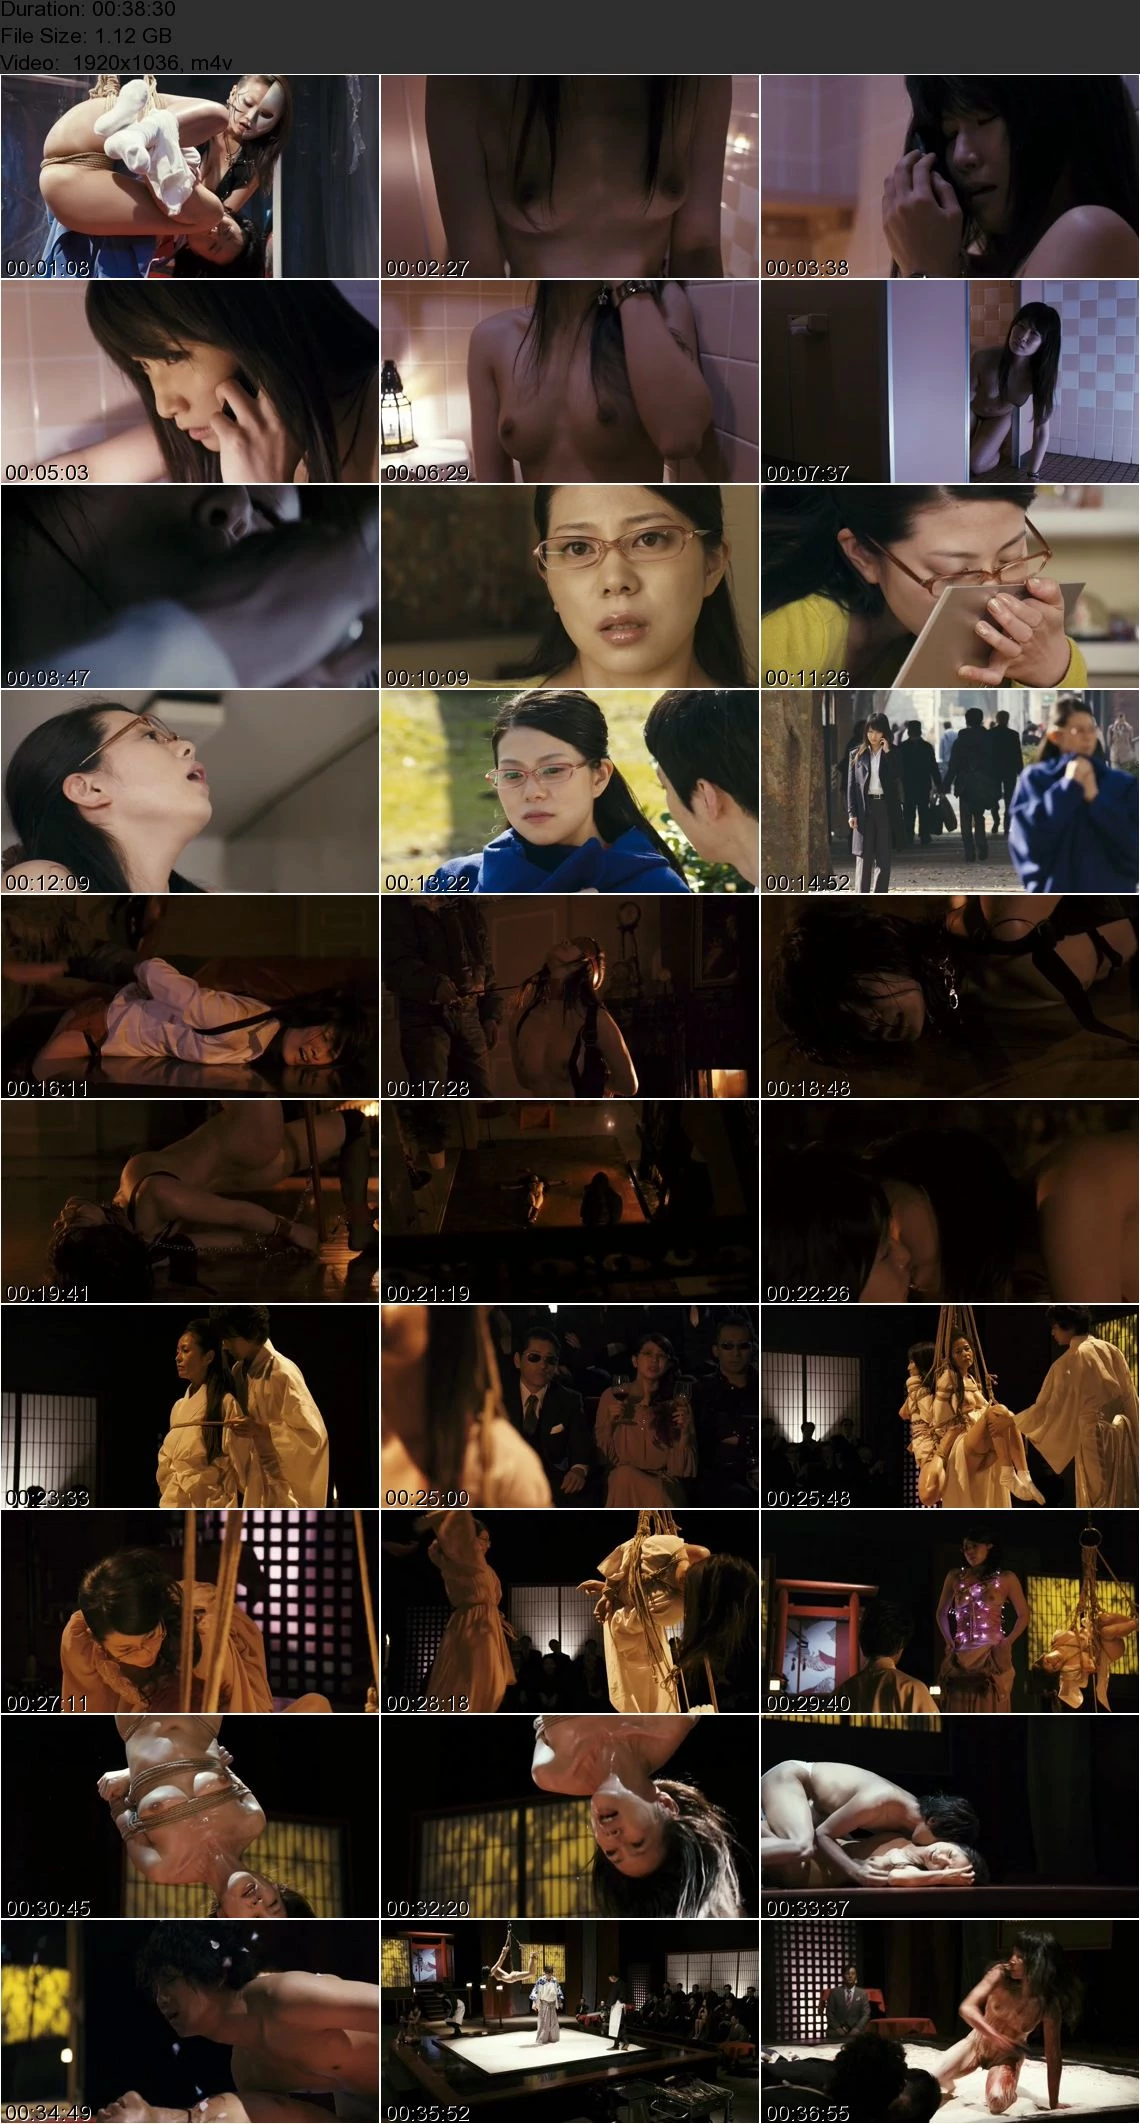 Sexual torture and mother son incest in Japan drama Hana to hebi: Zero  (2014)